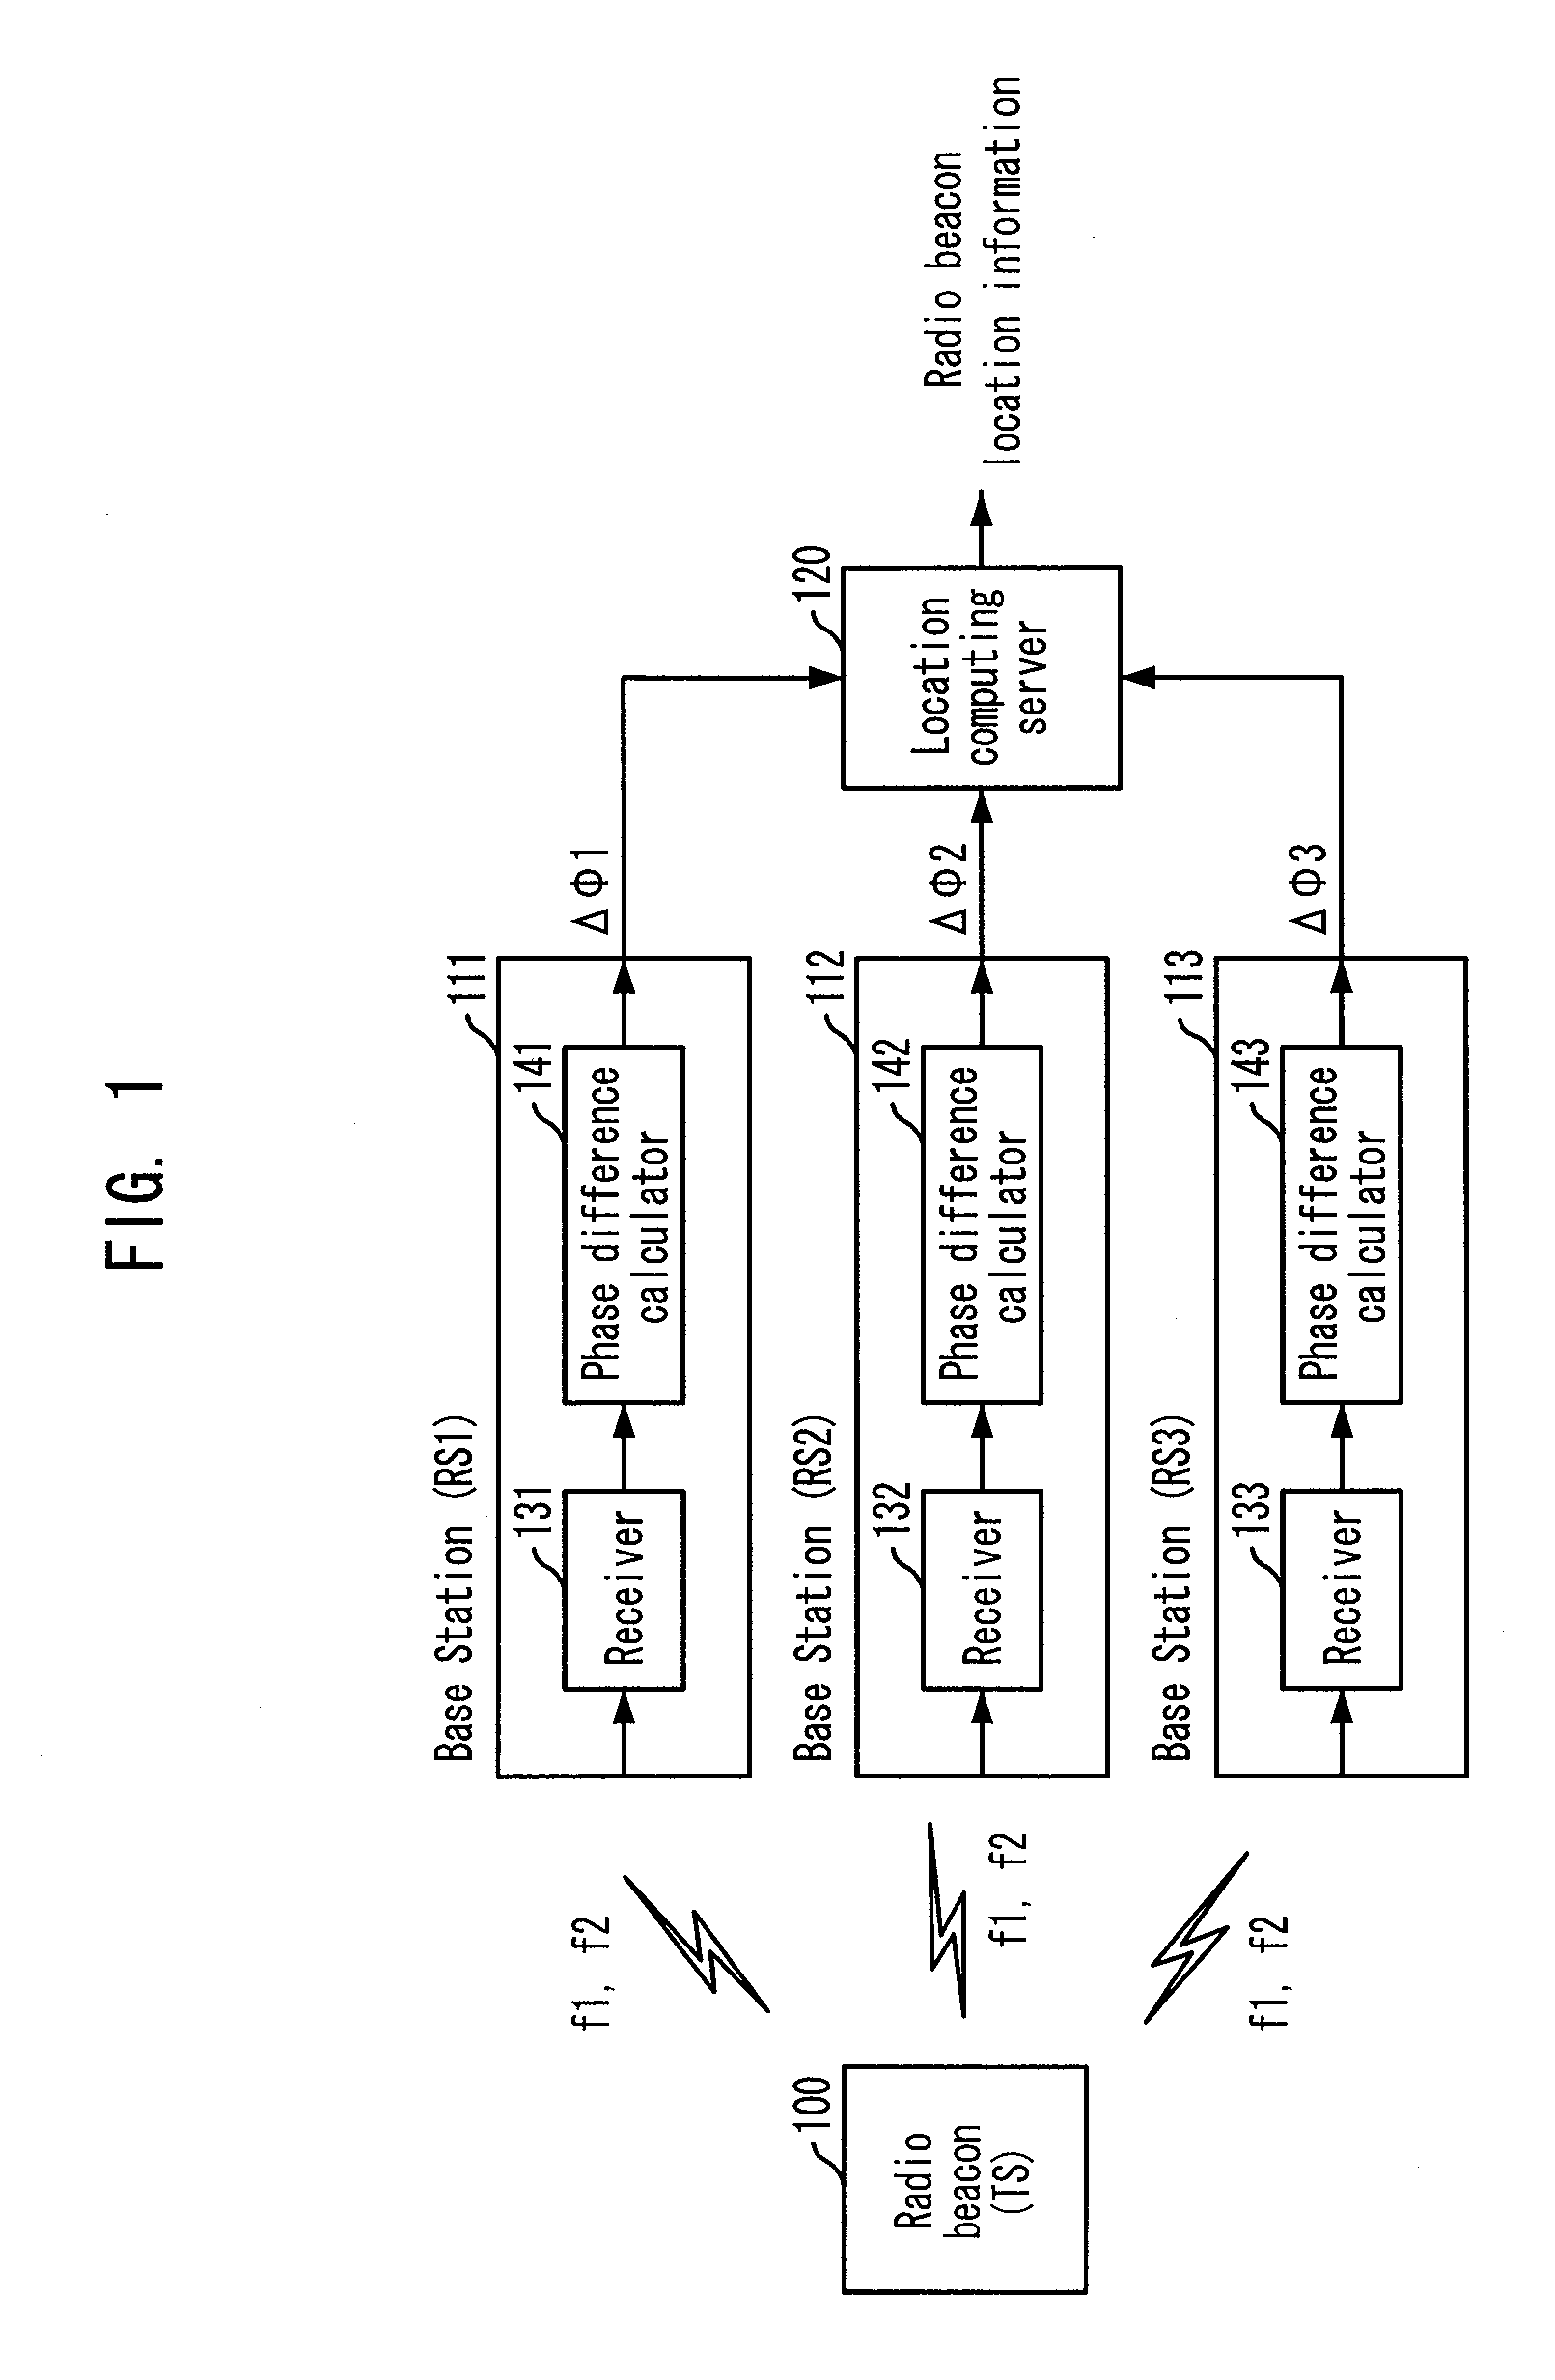 Apparatus and Method for Computing Location of a Moving Beacon Using Time Difference of Arrival and Multi-Frequencies